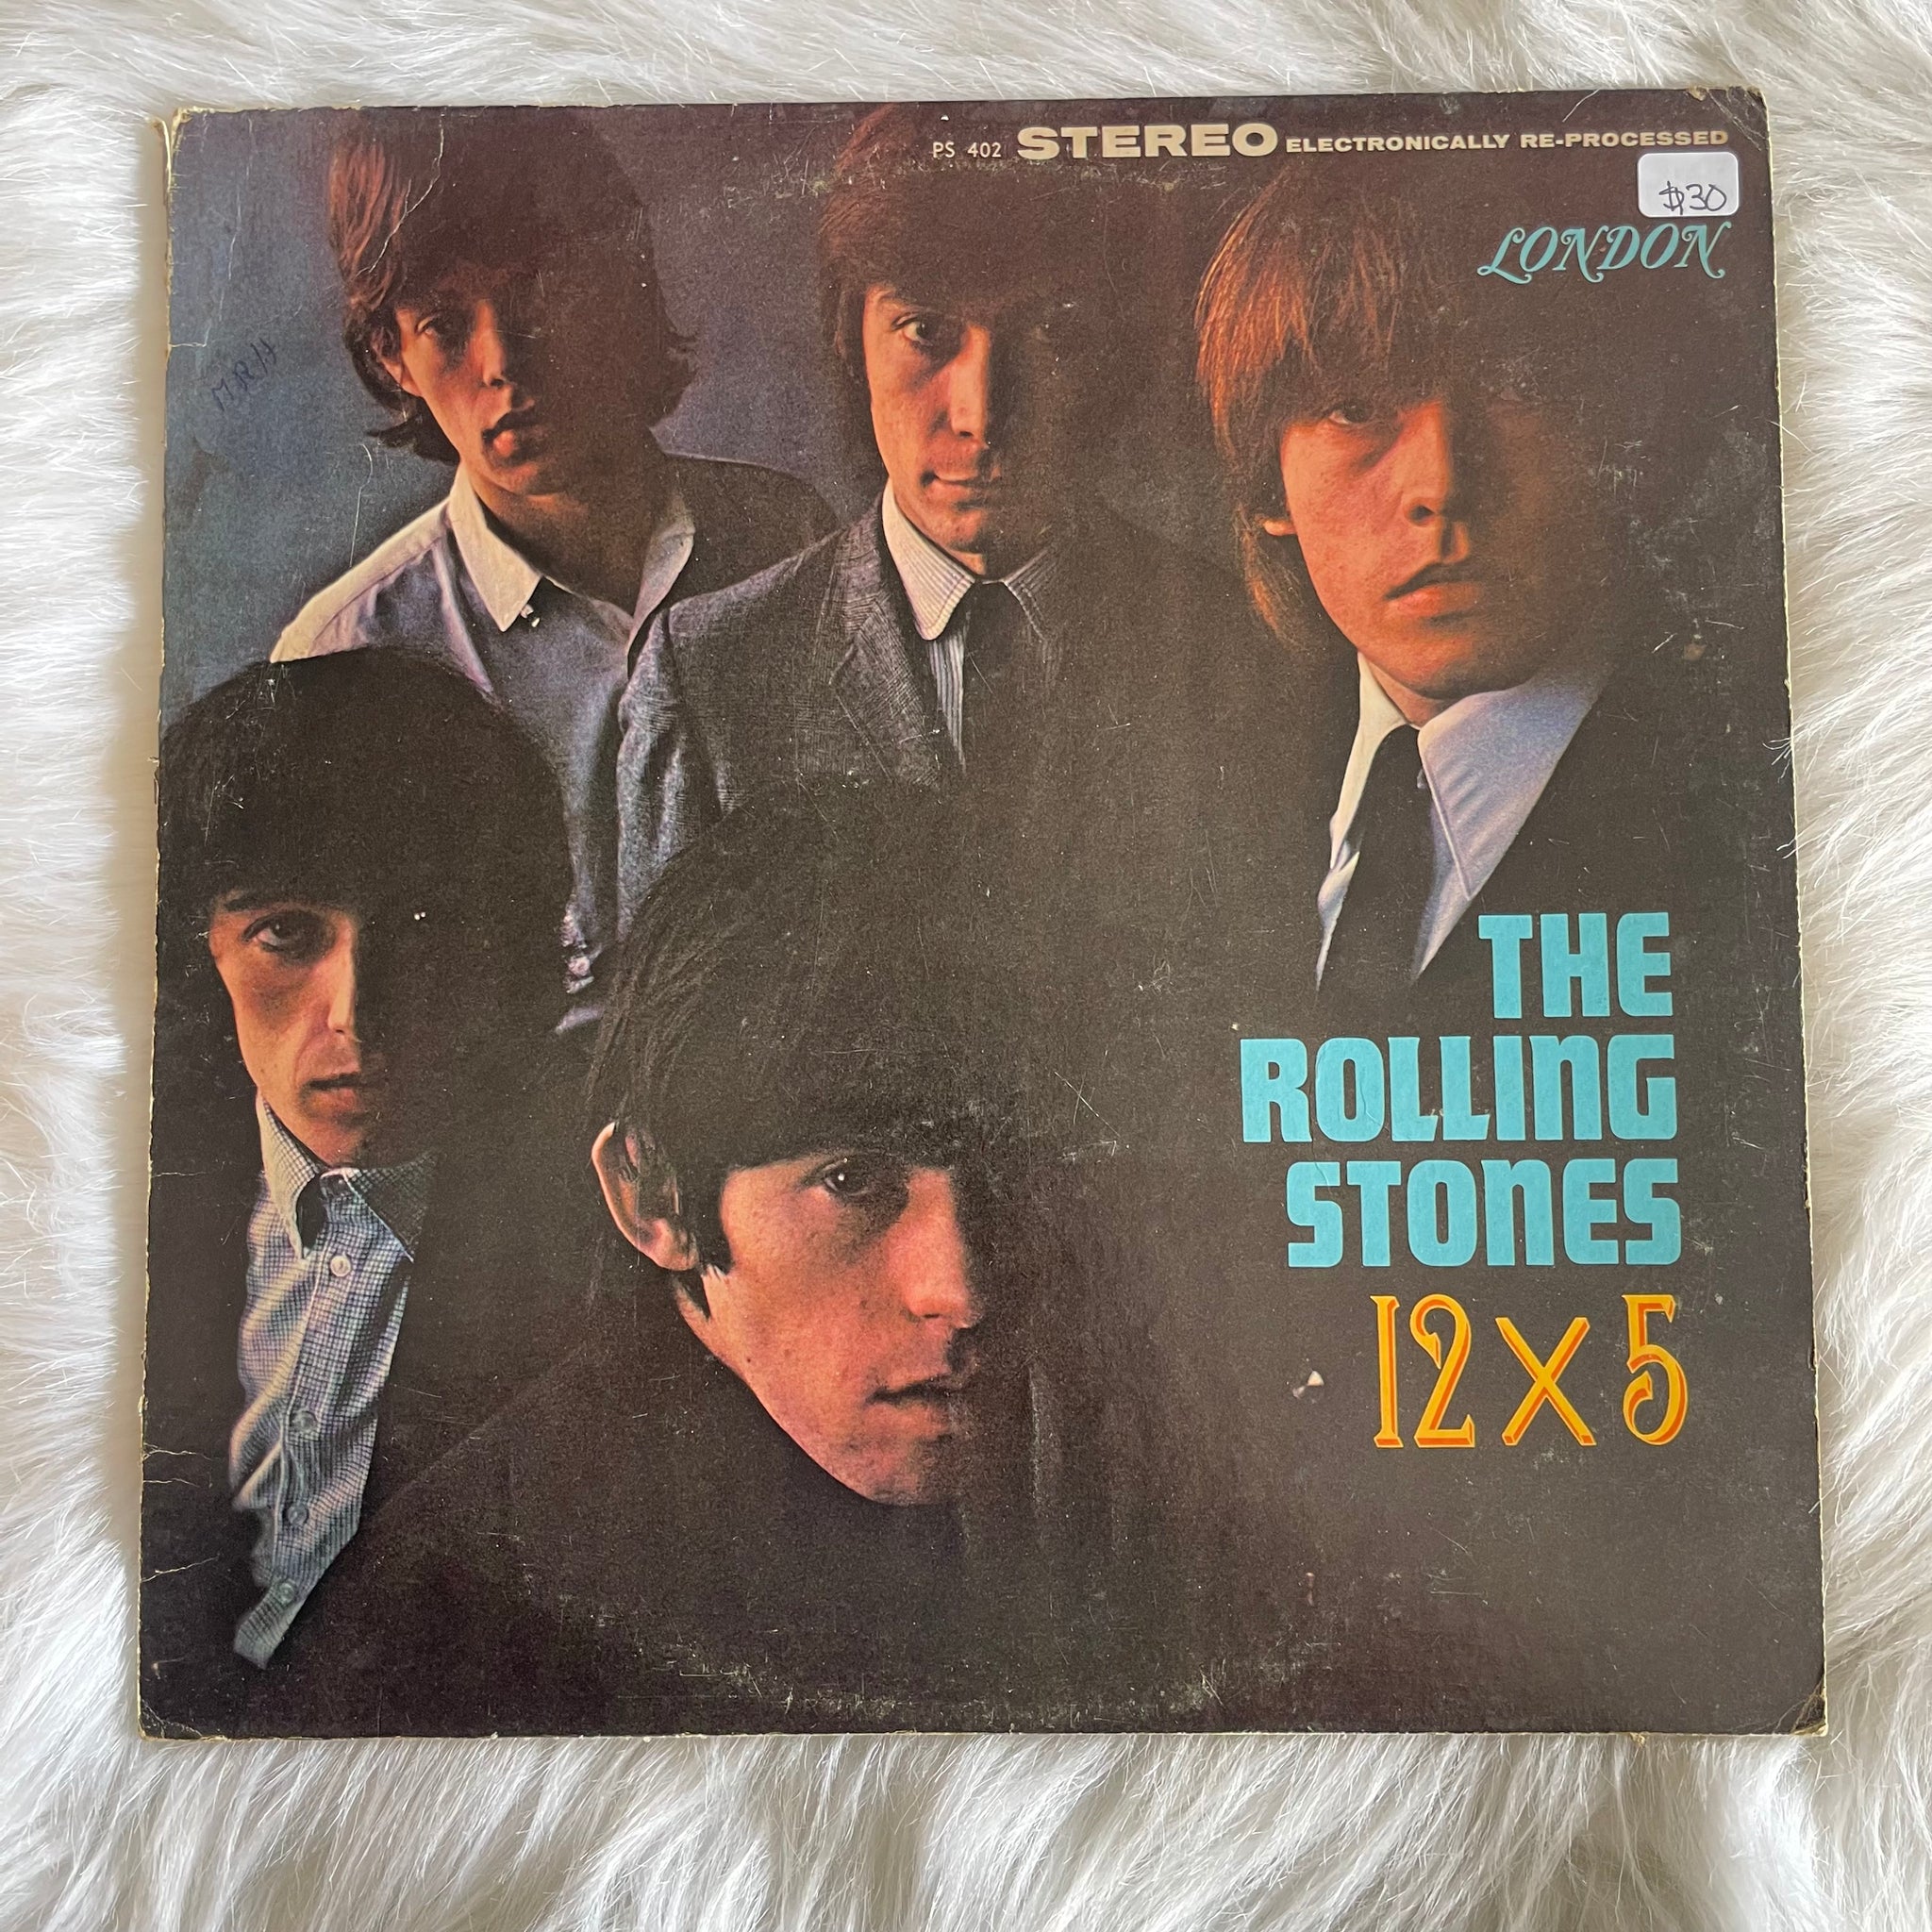 Rolling Stones-12x5 STEREO